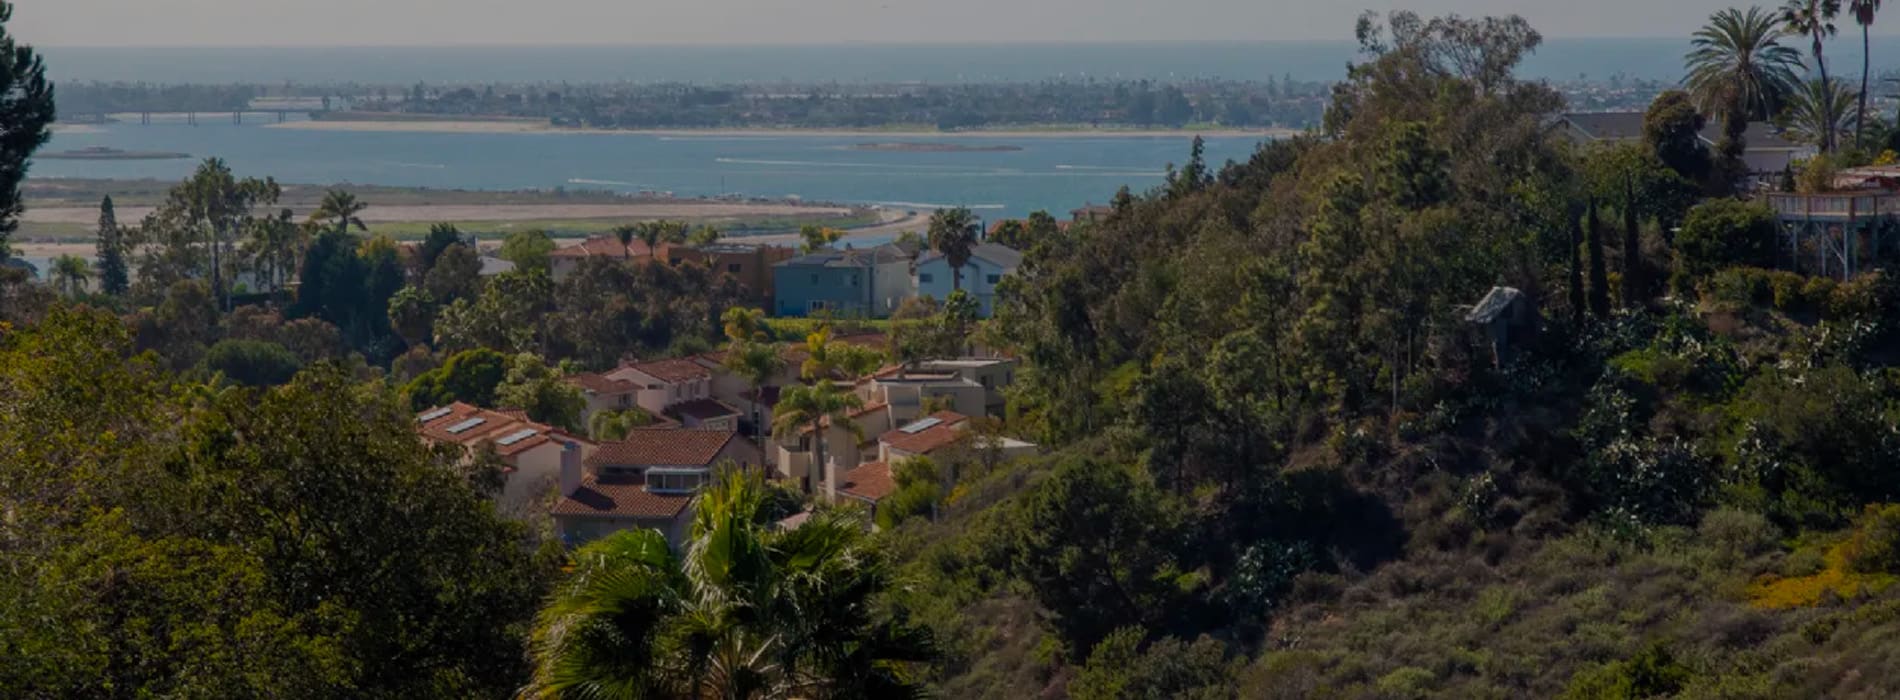 View of Mission Bay from Clairemont Mesa. Discover homes for sale opportunities near Clairemont San Diego